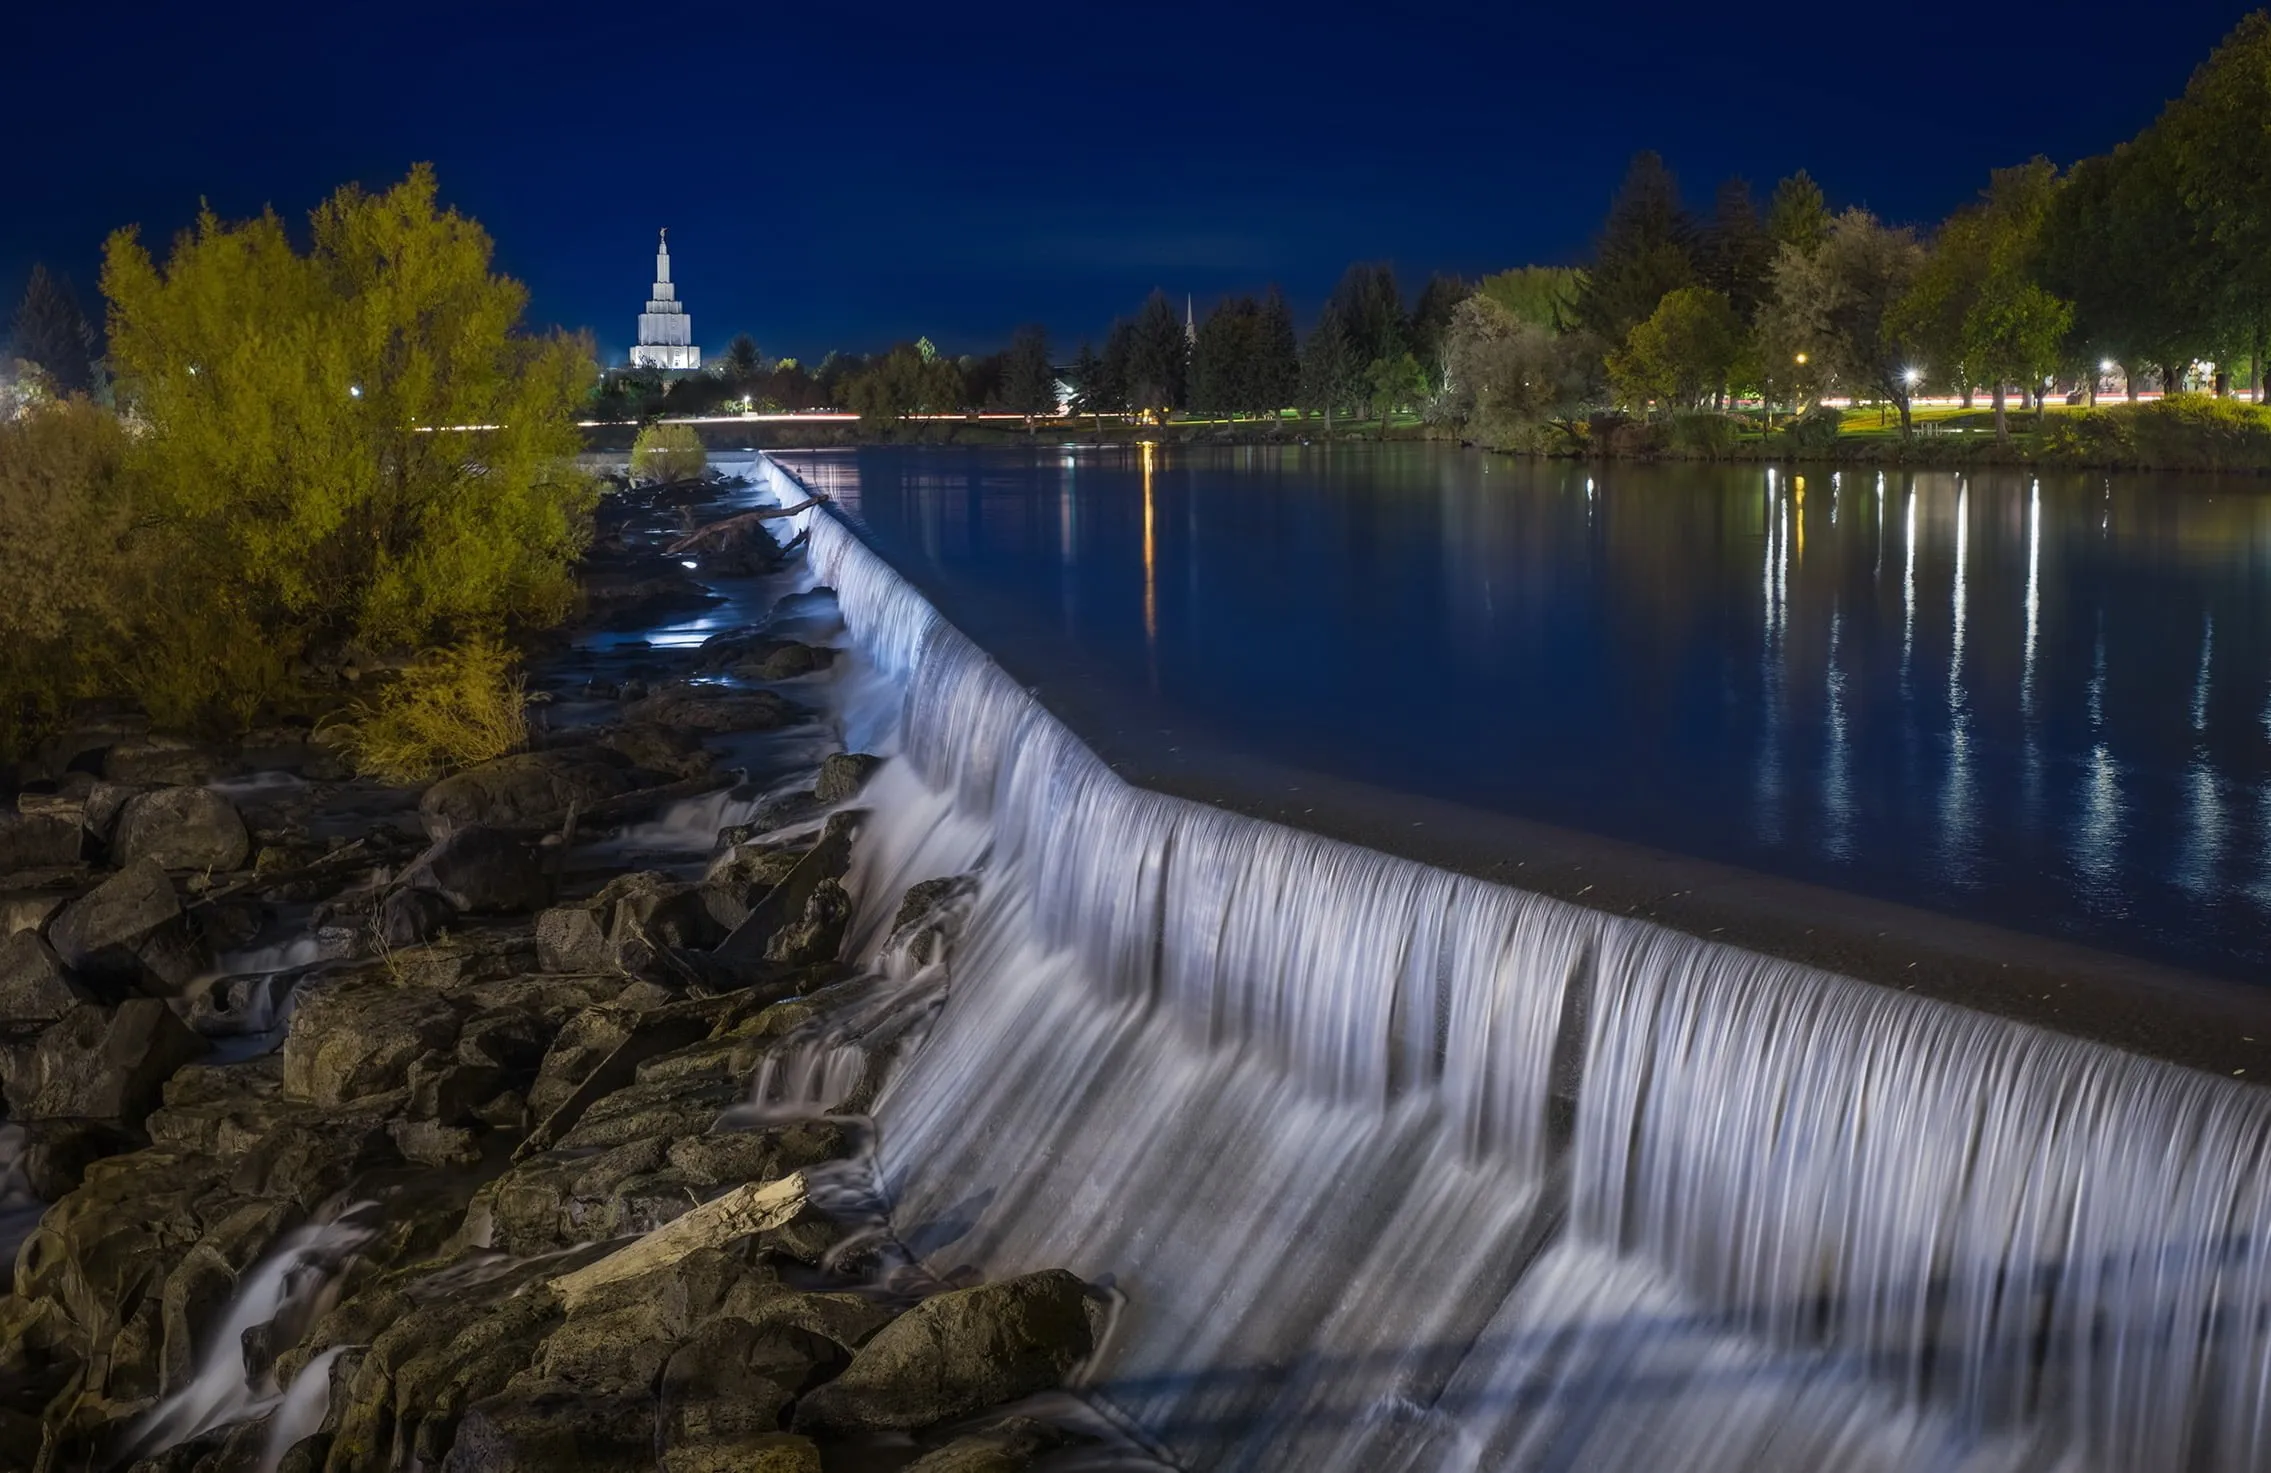 Picture of Idaho Falls. If you’ve been injured in Idaho Falls, our personal injury lawyers can help you get the justice you deserve.